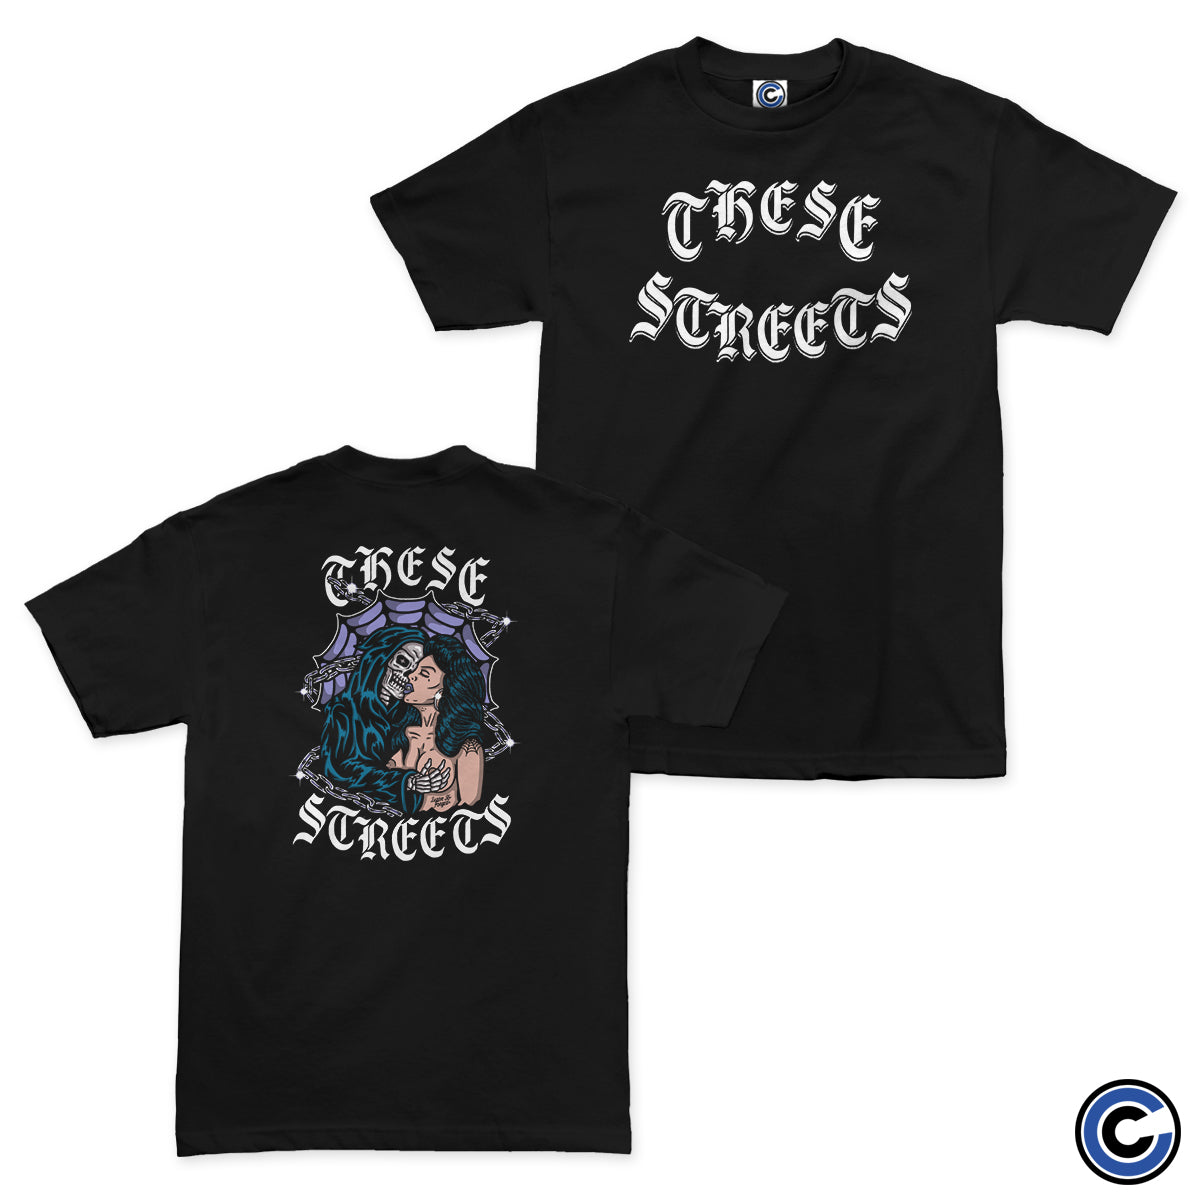 These Streets "Web Reaper" Shirt